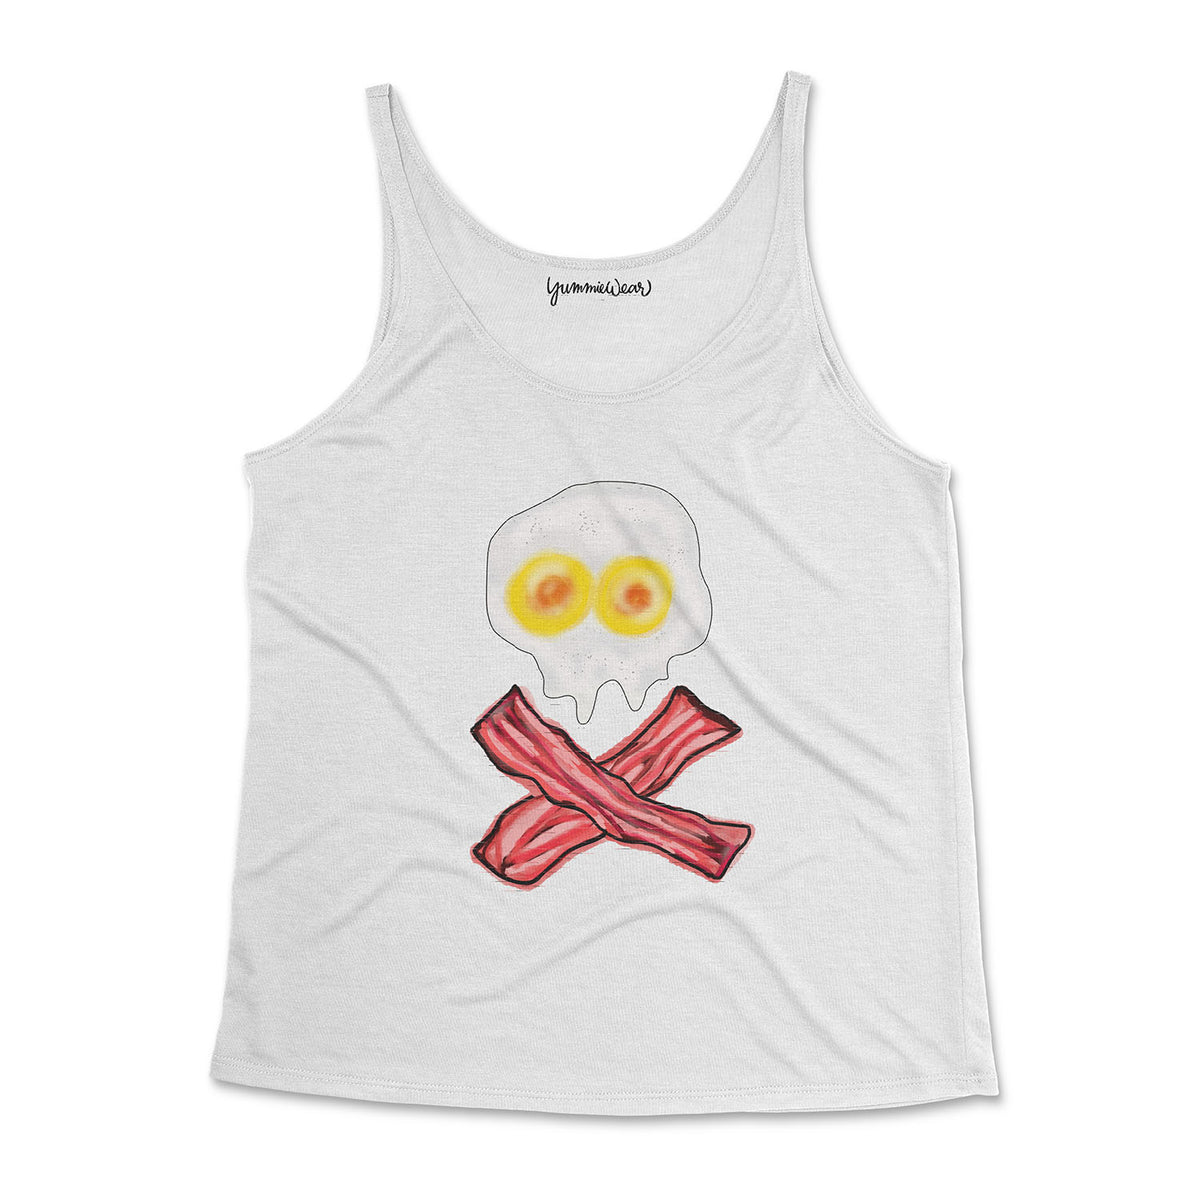 Women's Bacon and Eggs (BAE) Skull Super Soft Slouchy Tank Top